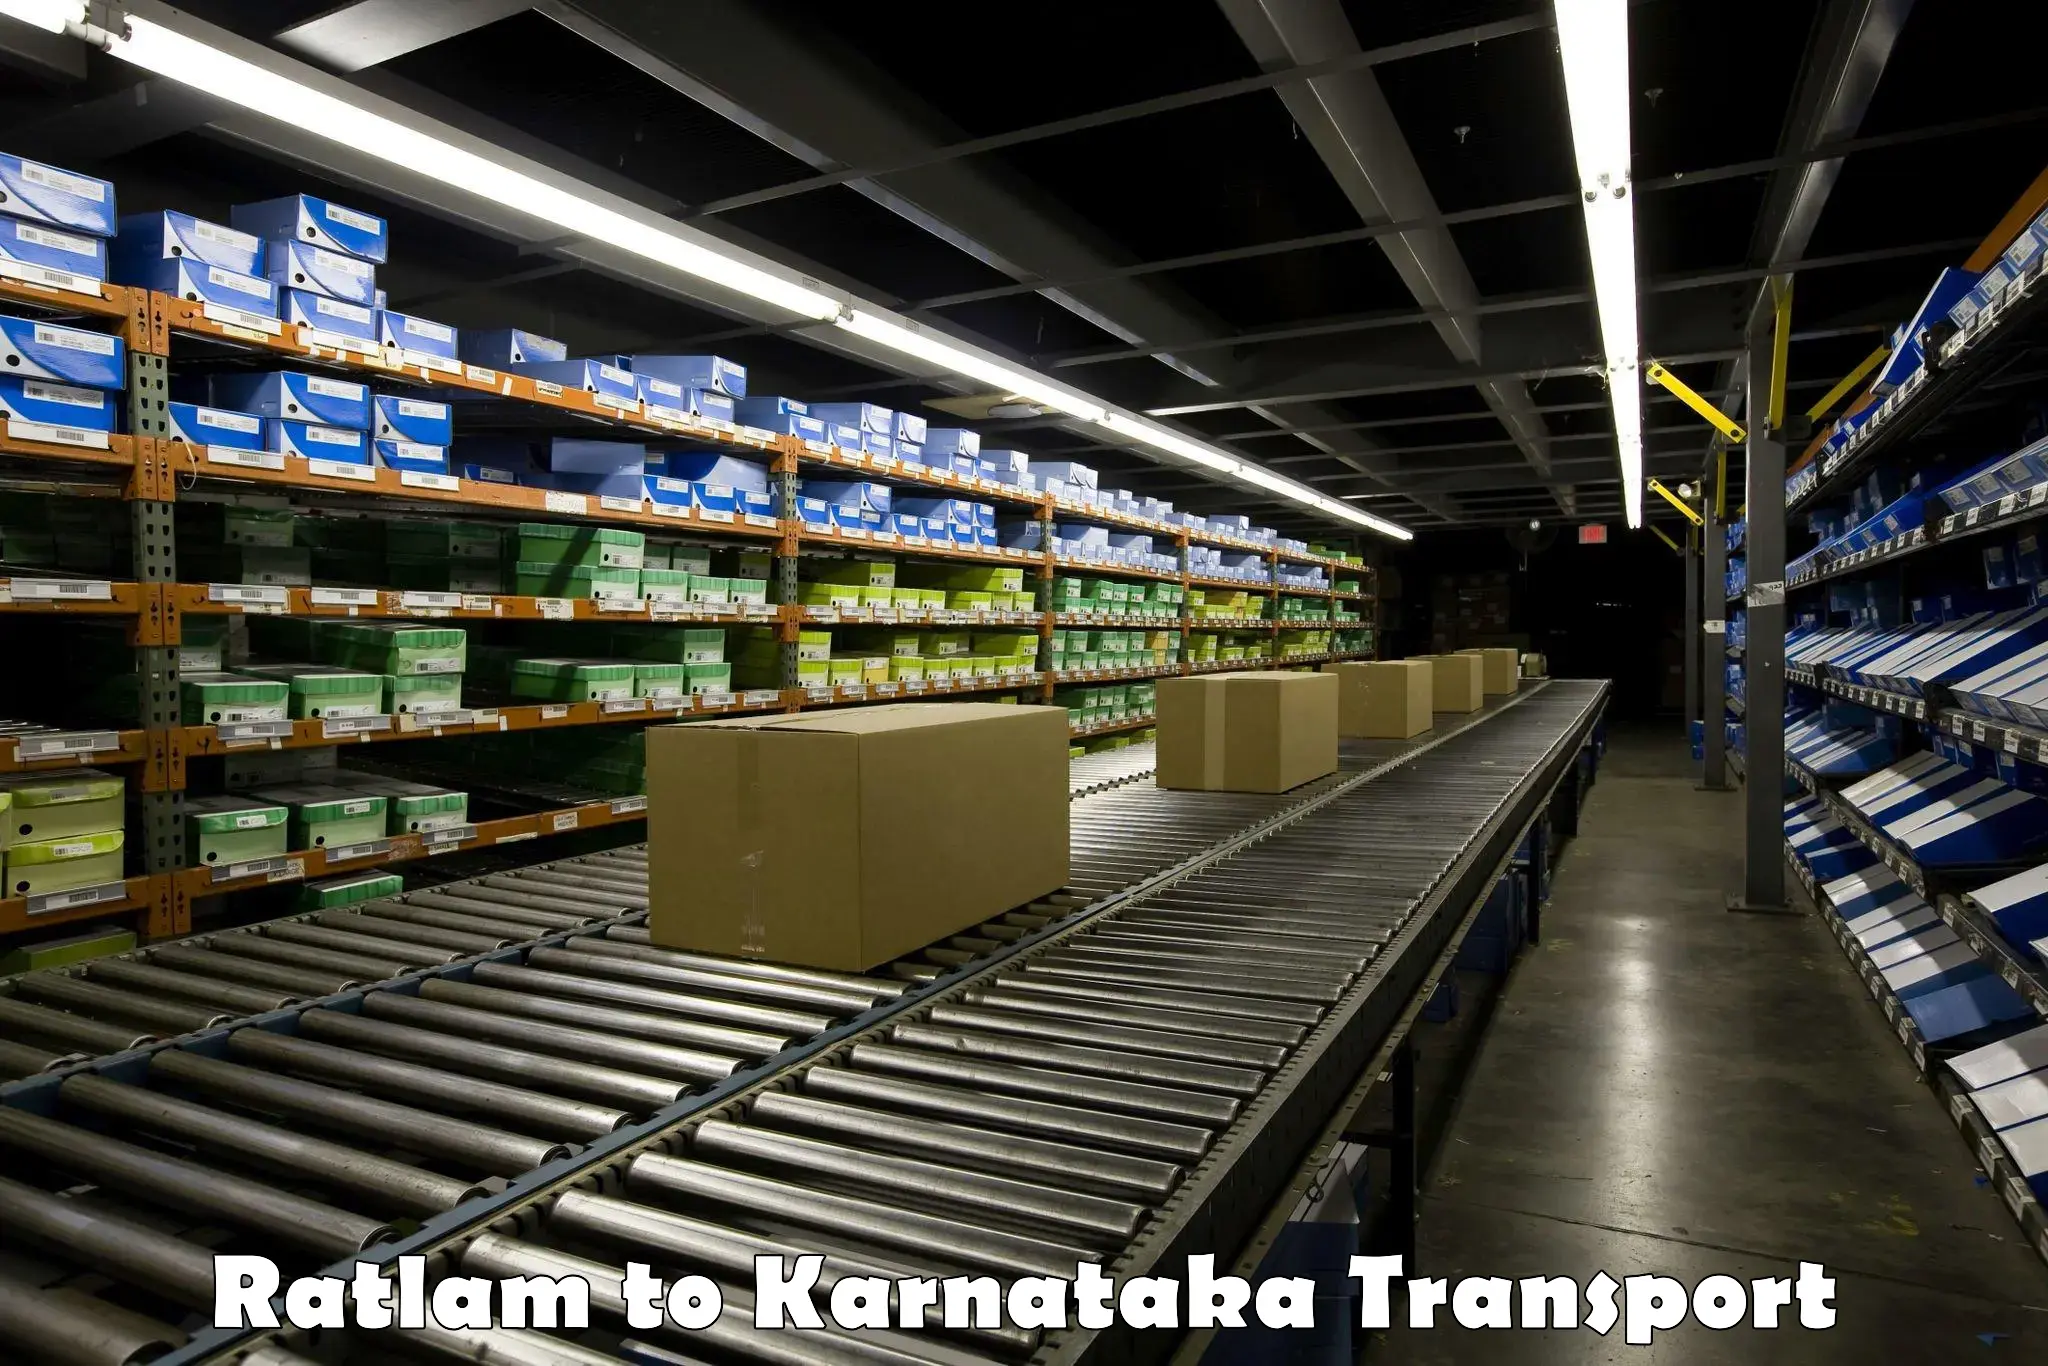 Truck transport companies in India Ratlam to Gonikoppal